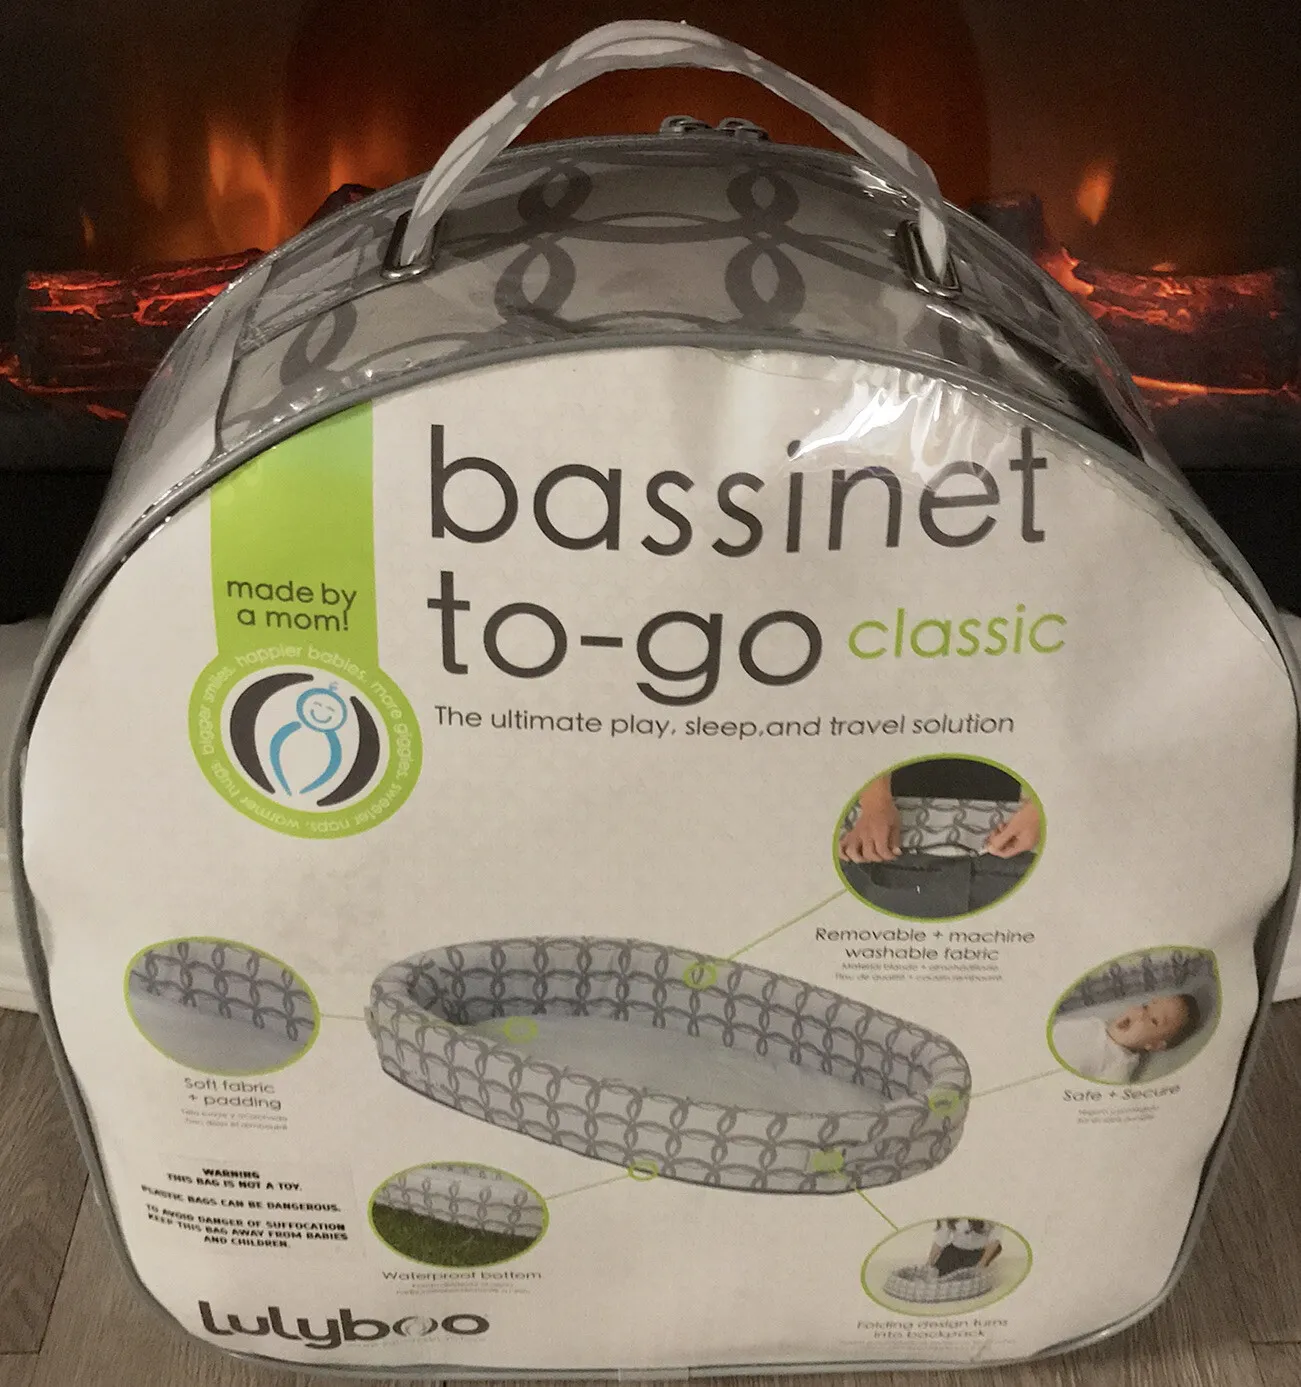 New Bassinet To-go Classic Lulyboo Play, Sleep & Travel Solution Waterproof